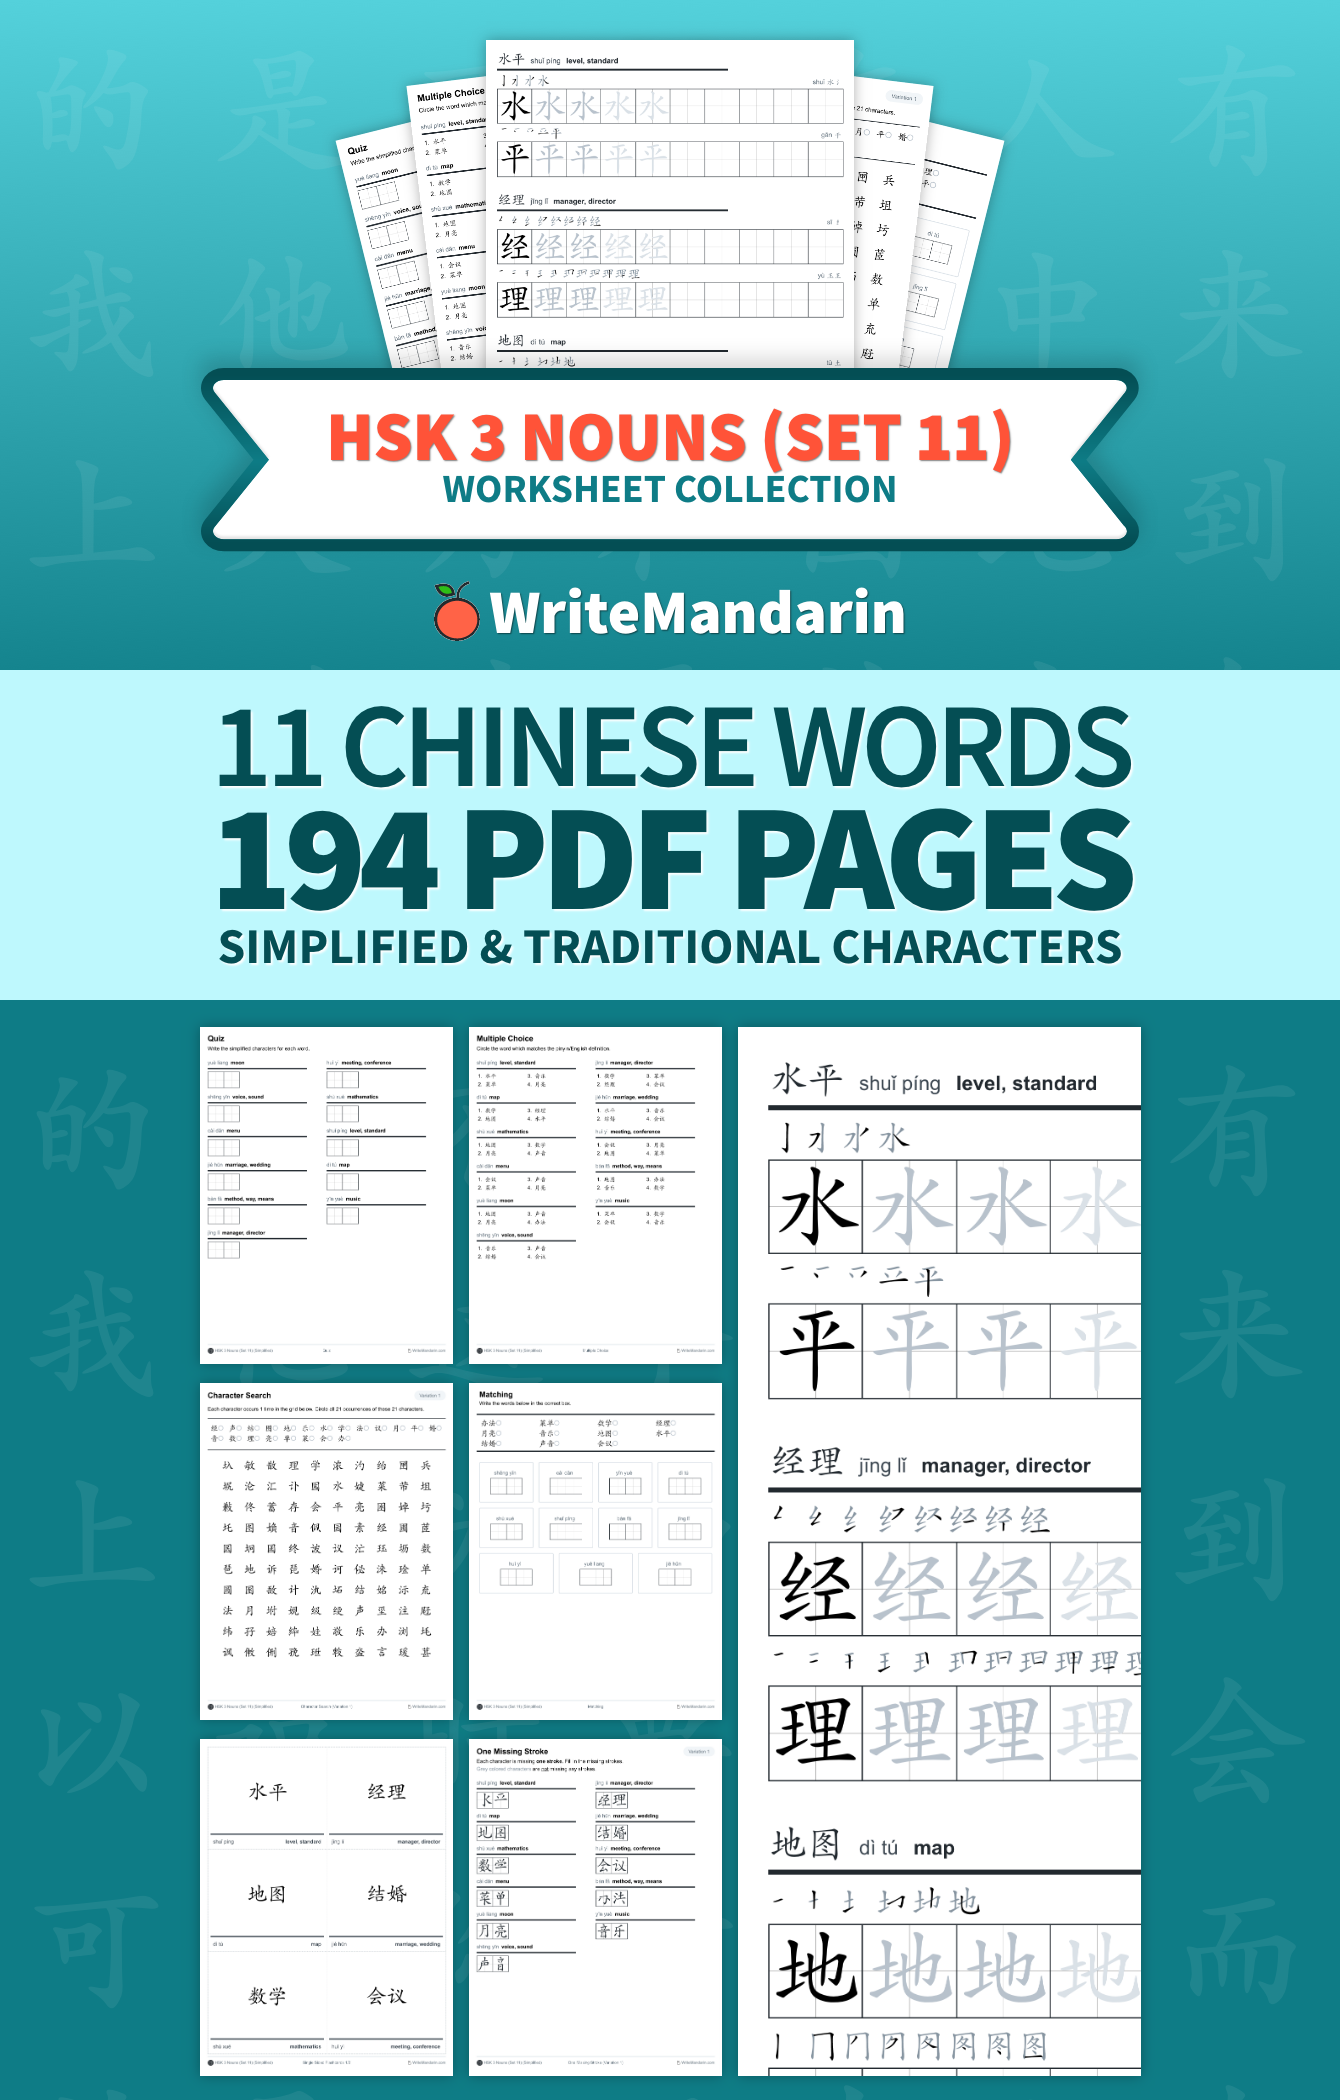 Preview image of HSK 3 Nouns (Set 11) worksheet collection